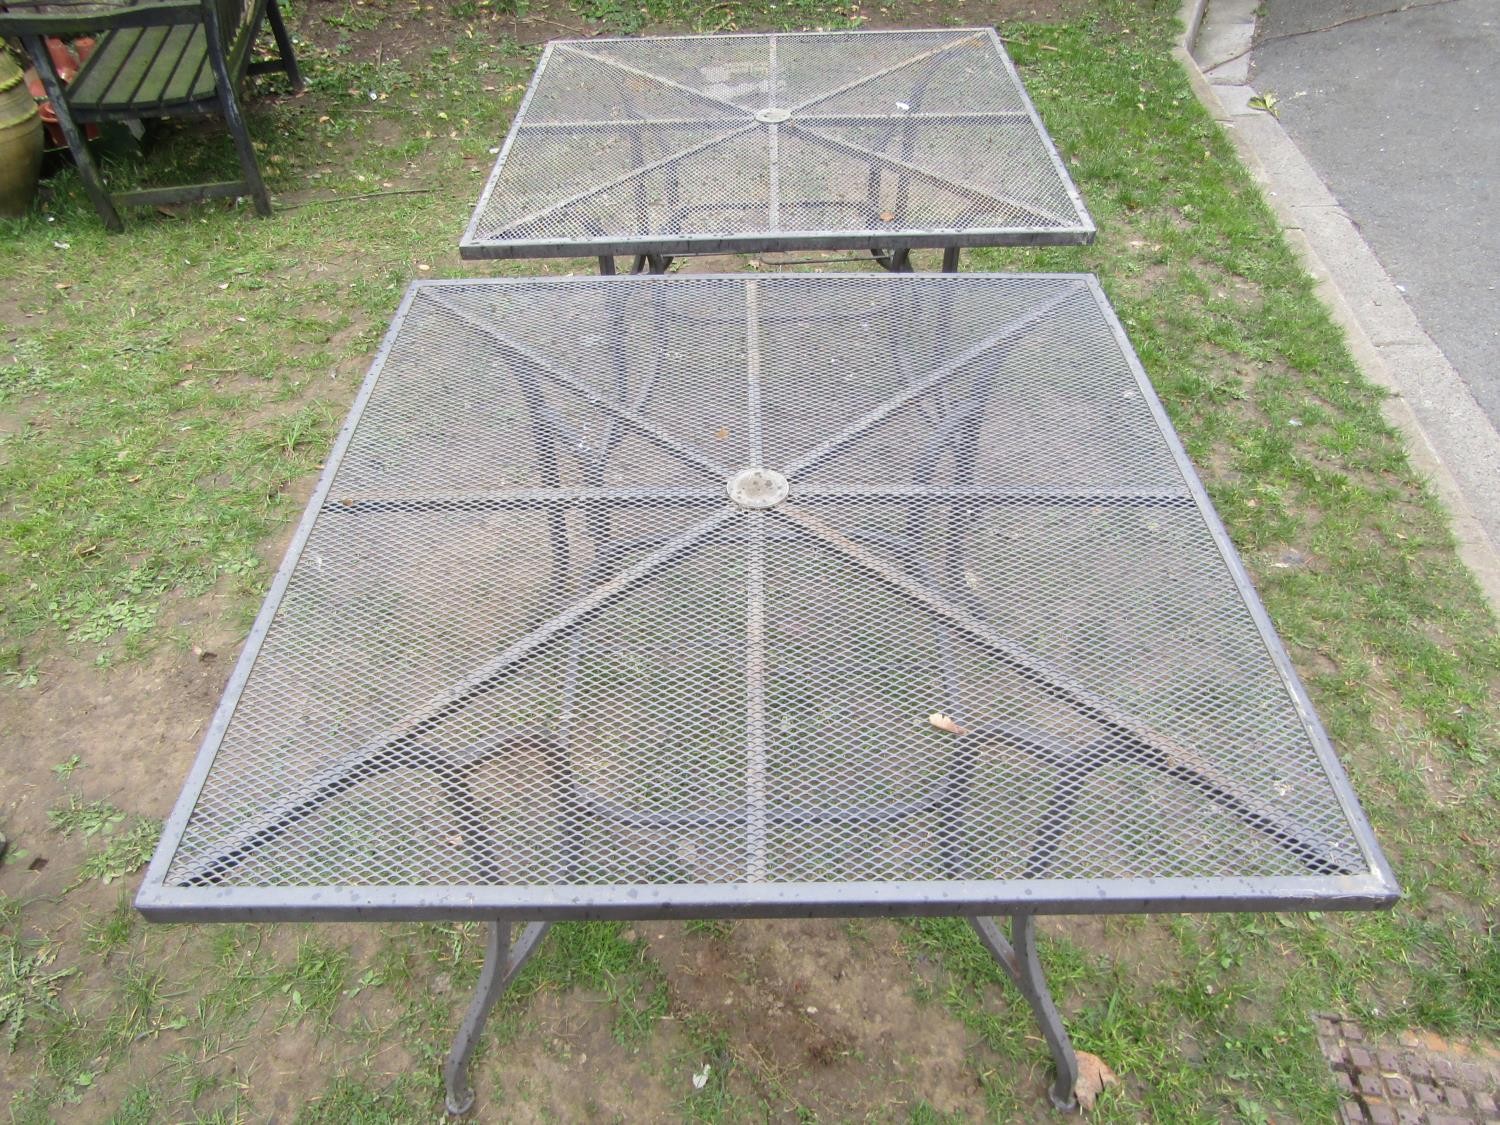 Two good quality contemporary garden tables with square mesh panelled tops, together with a set of - Image 4 of 4